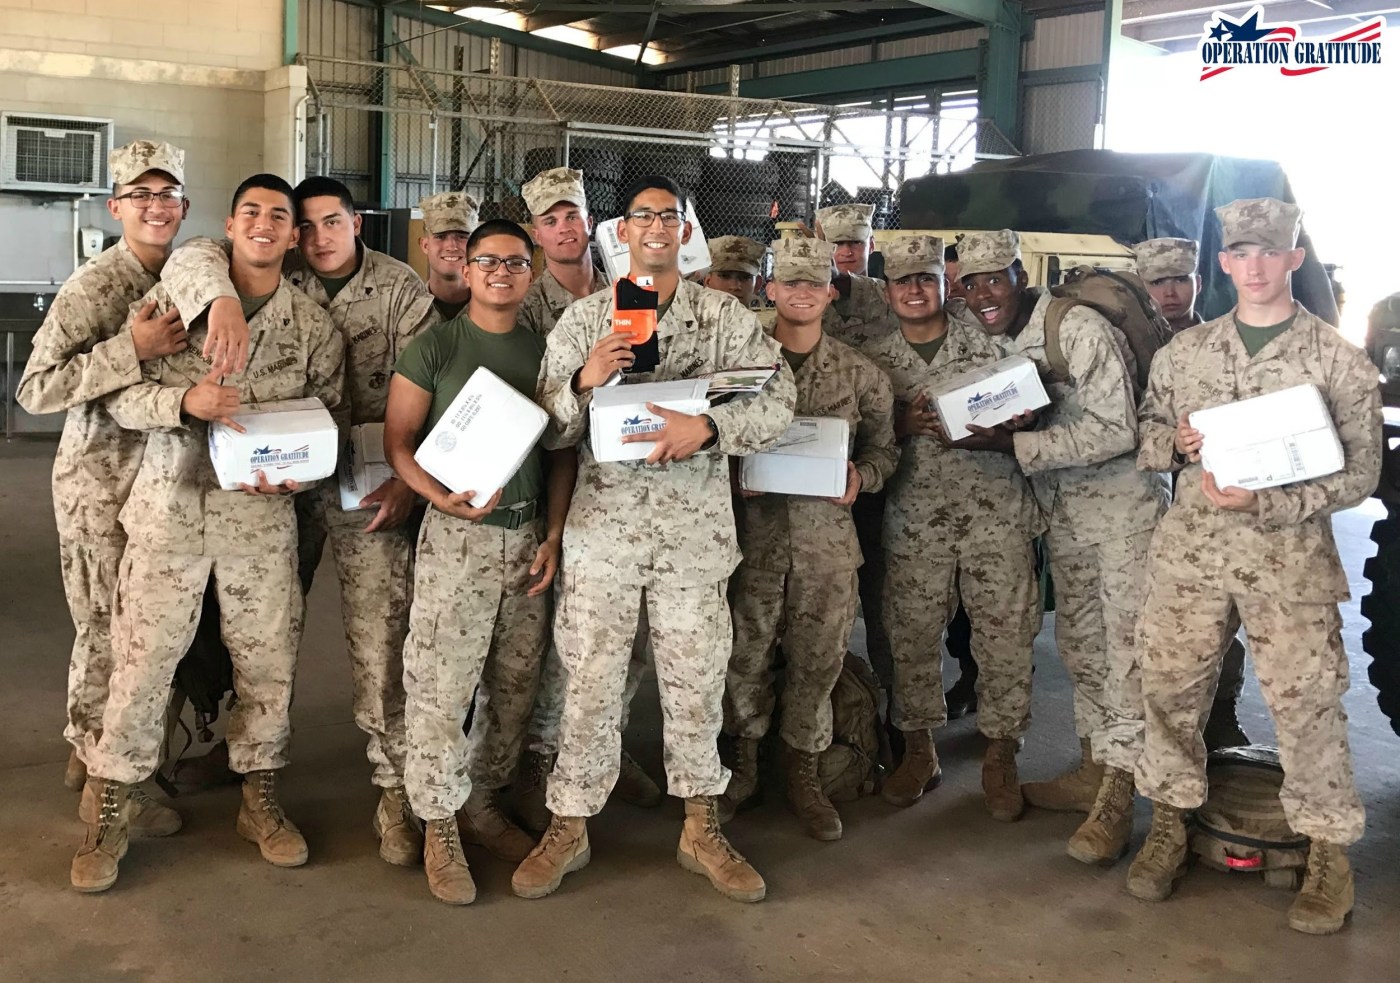 Operation Gratitude: Serving Those Who Serve and Paying It Forward